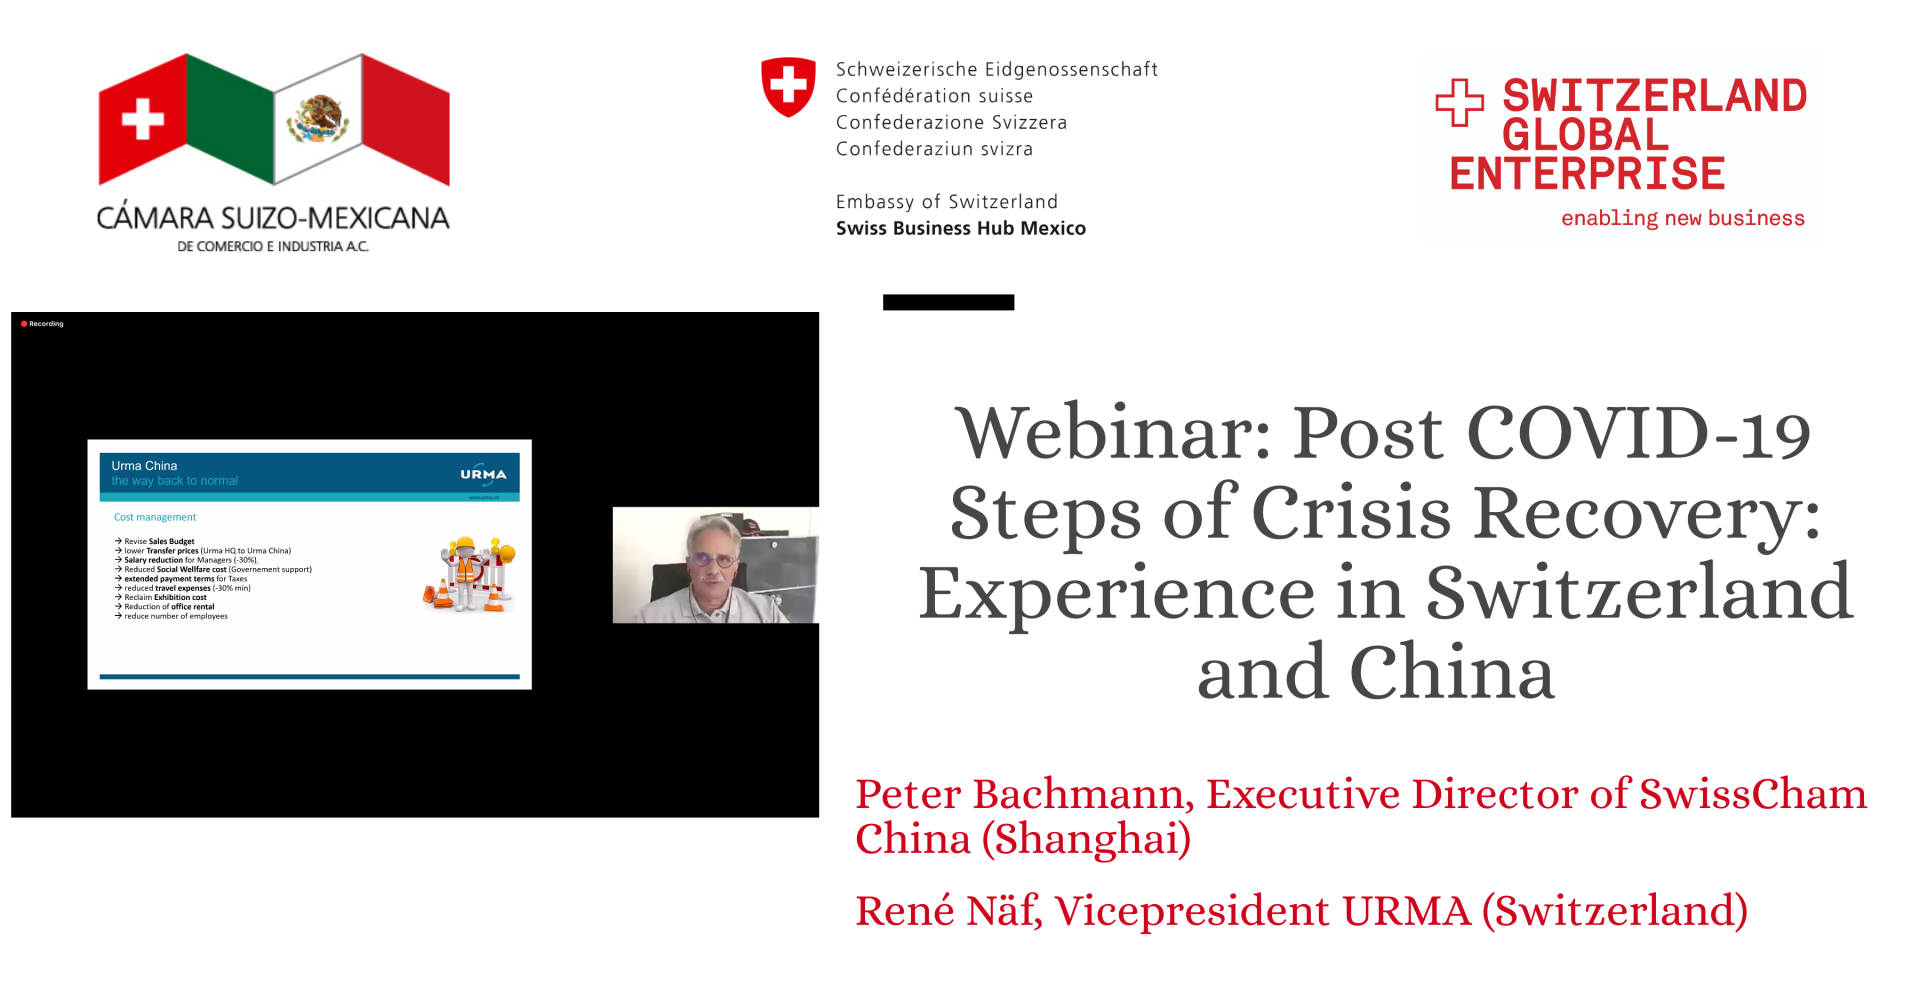 Webinar: Post COVID-19 Steps of crisis recovery: Experience in Switzerland and China